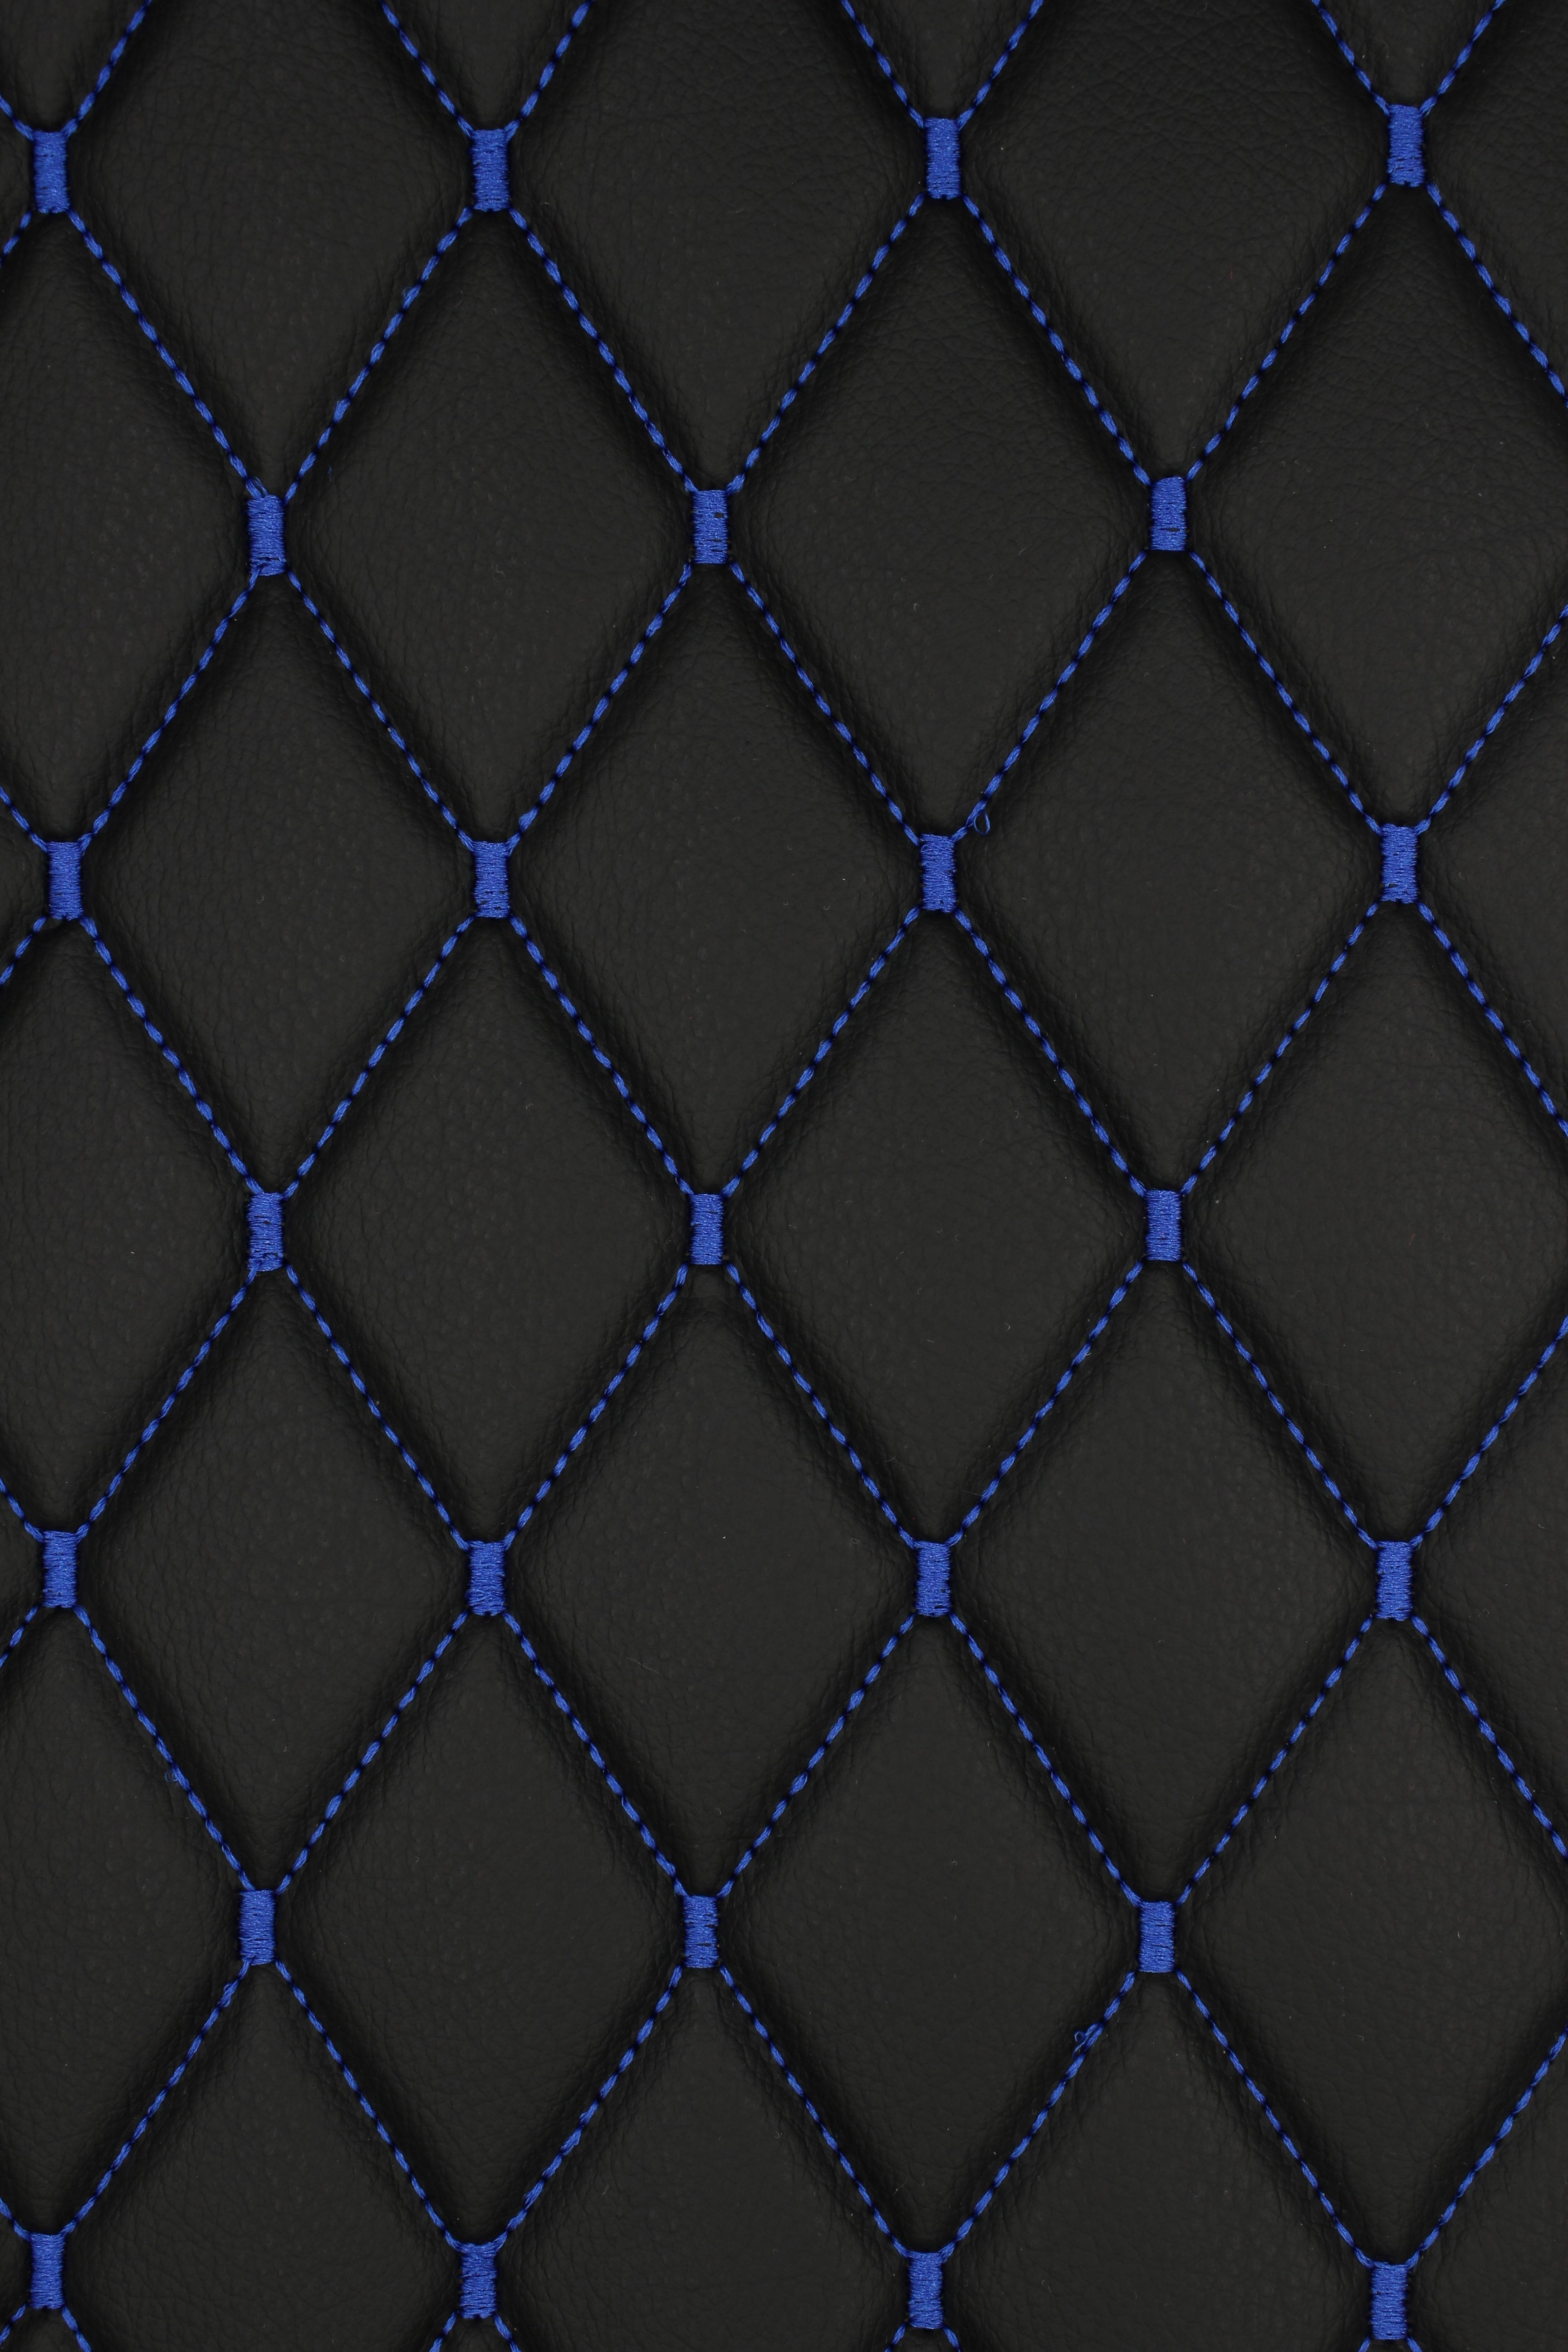 Blue Quilted Vinyl Grain Faux Leather Car Upholstery Fabric | 2"x3" - 5x8cm Diamond Stitch with Foam | 140cm & 55.1" Wide | Artificial Leather